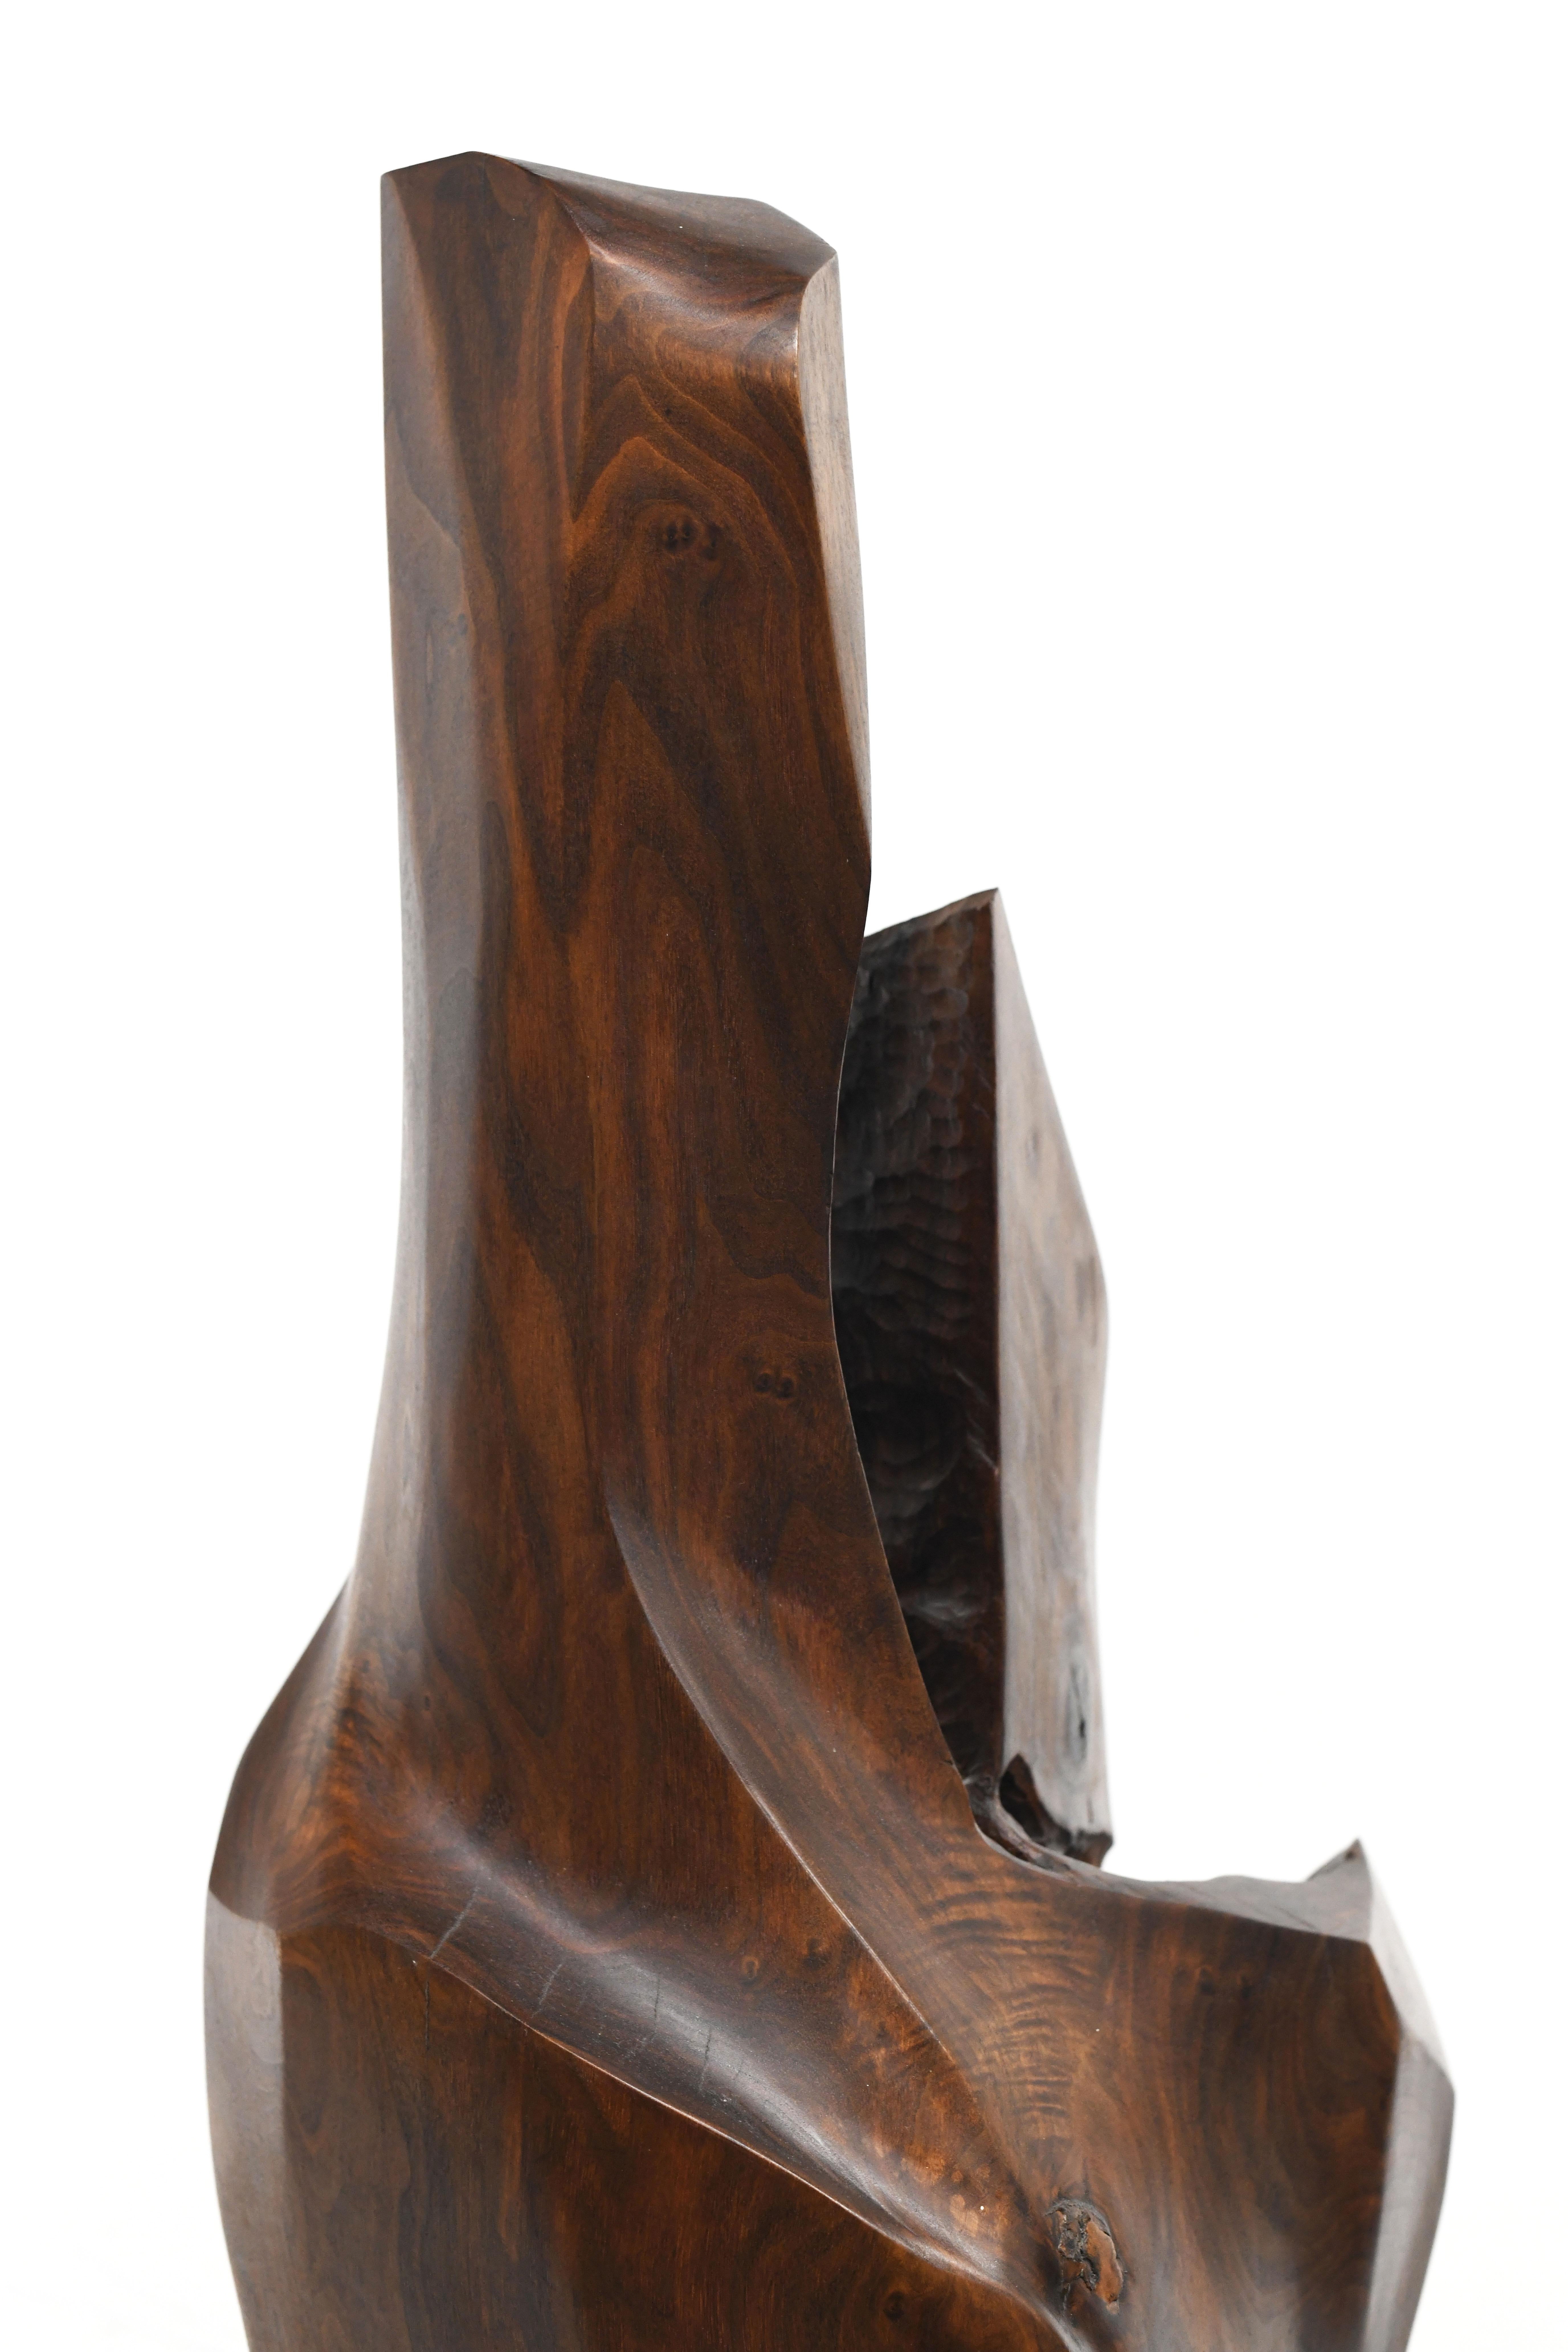 Exceptional wood sculpture carved from a single piece of solid black walnut. Sculpture is signed D. Gibbins and dated 1986. Wood pedestal is included. Condition is excellent. Measures 64 inches high without pedestal.


